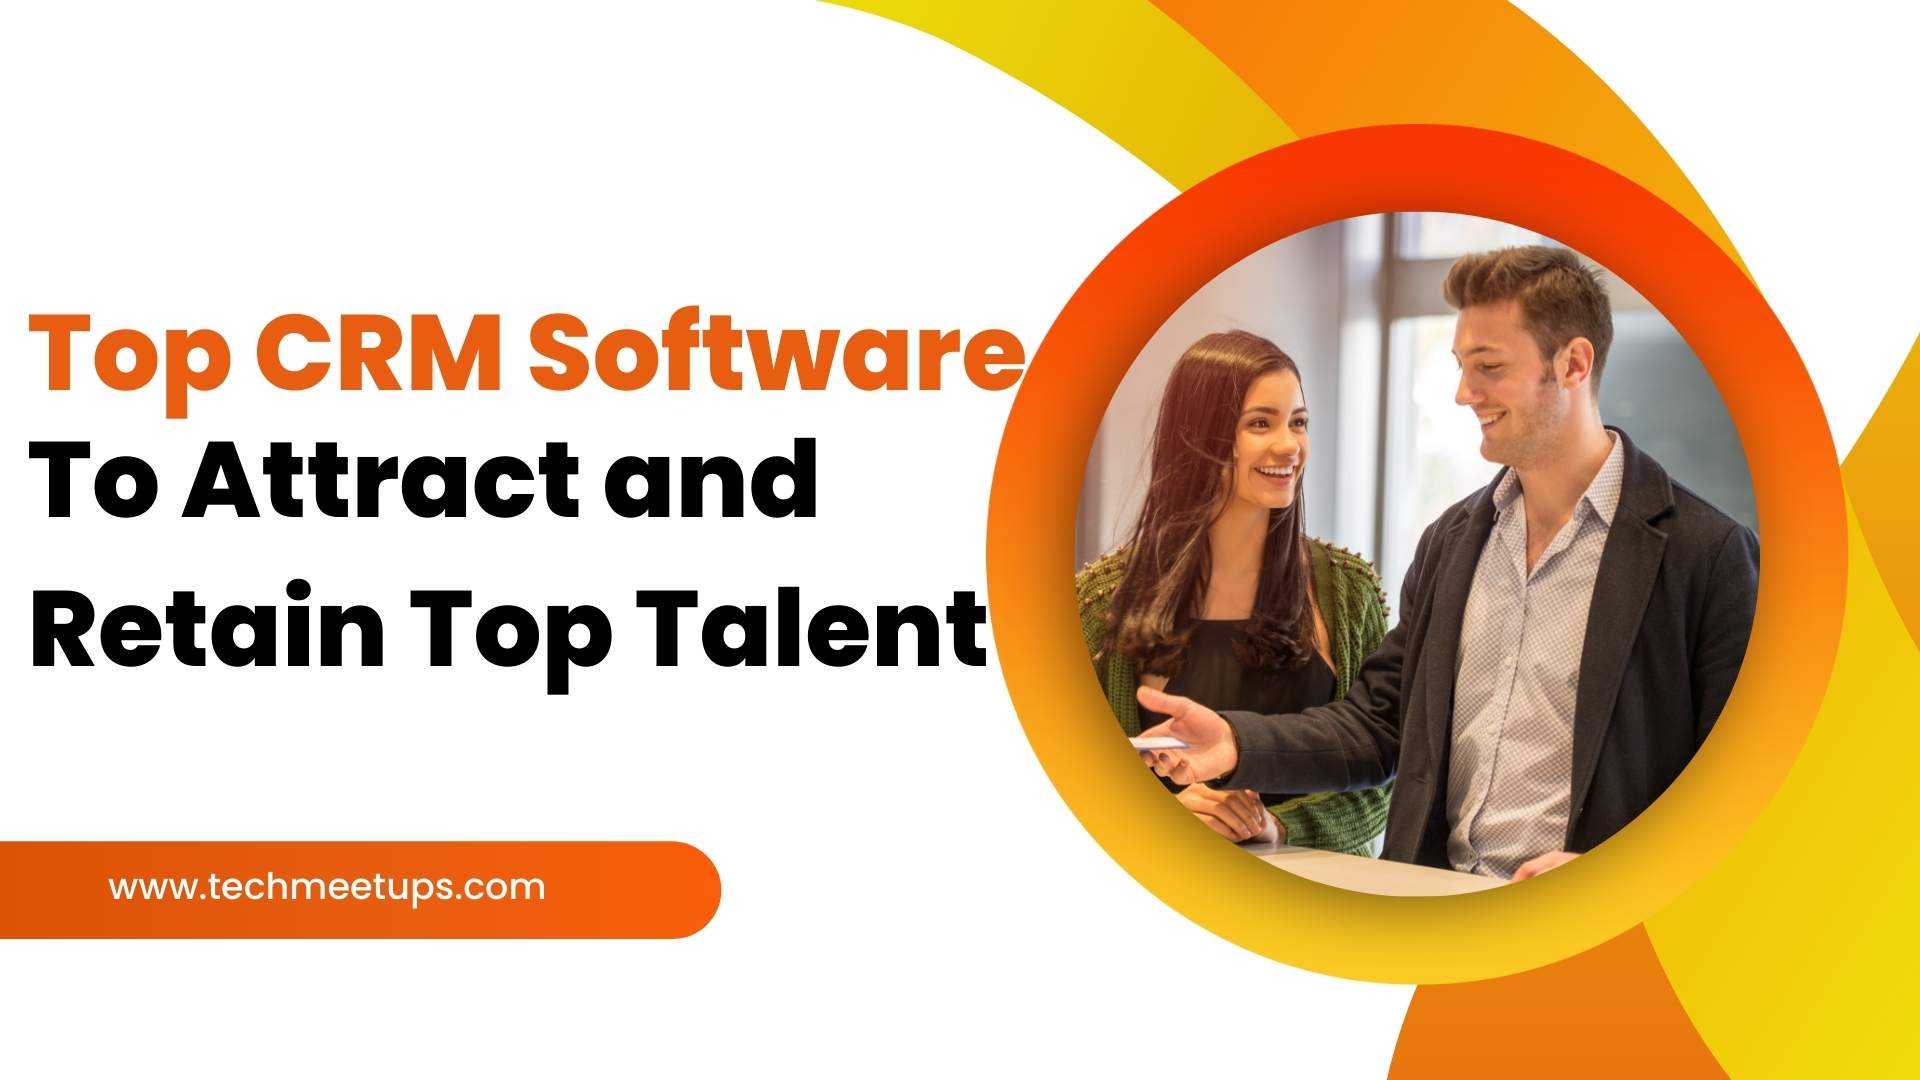 Top CRM Software to Attract and Retain Top Talent